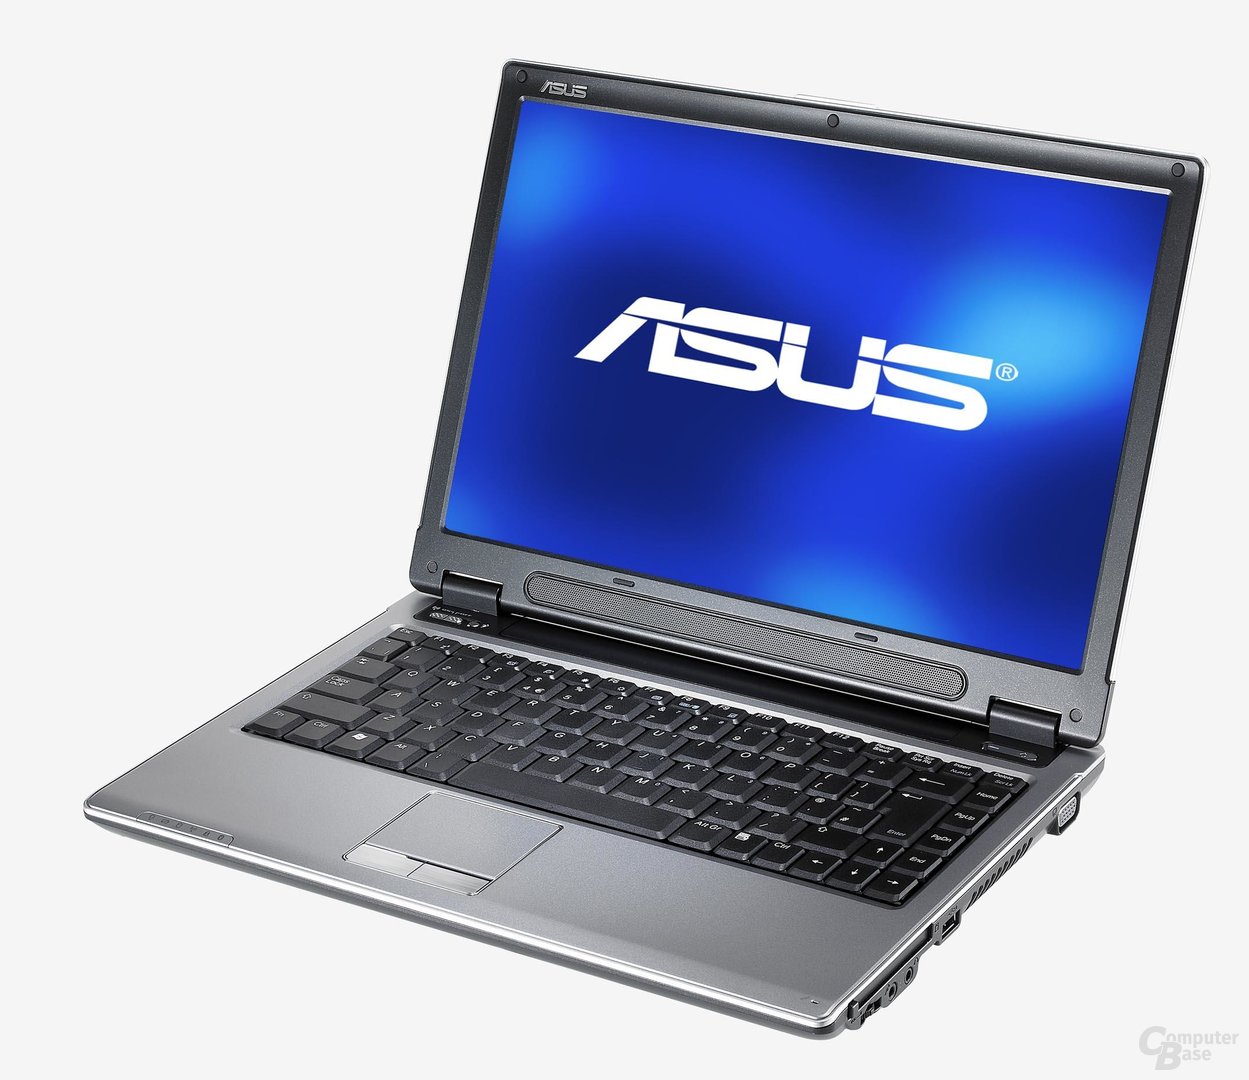 Asus W6A